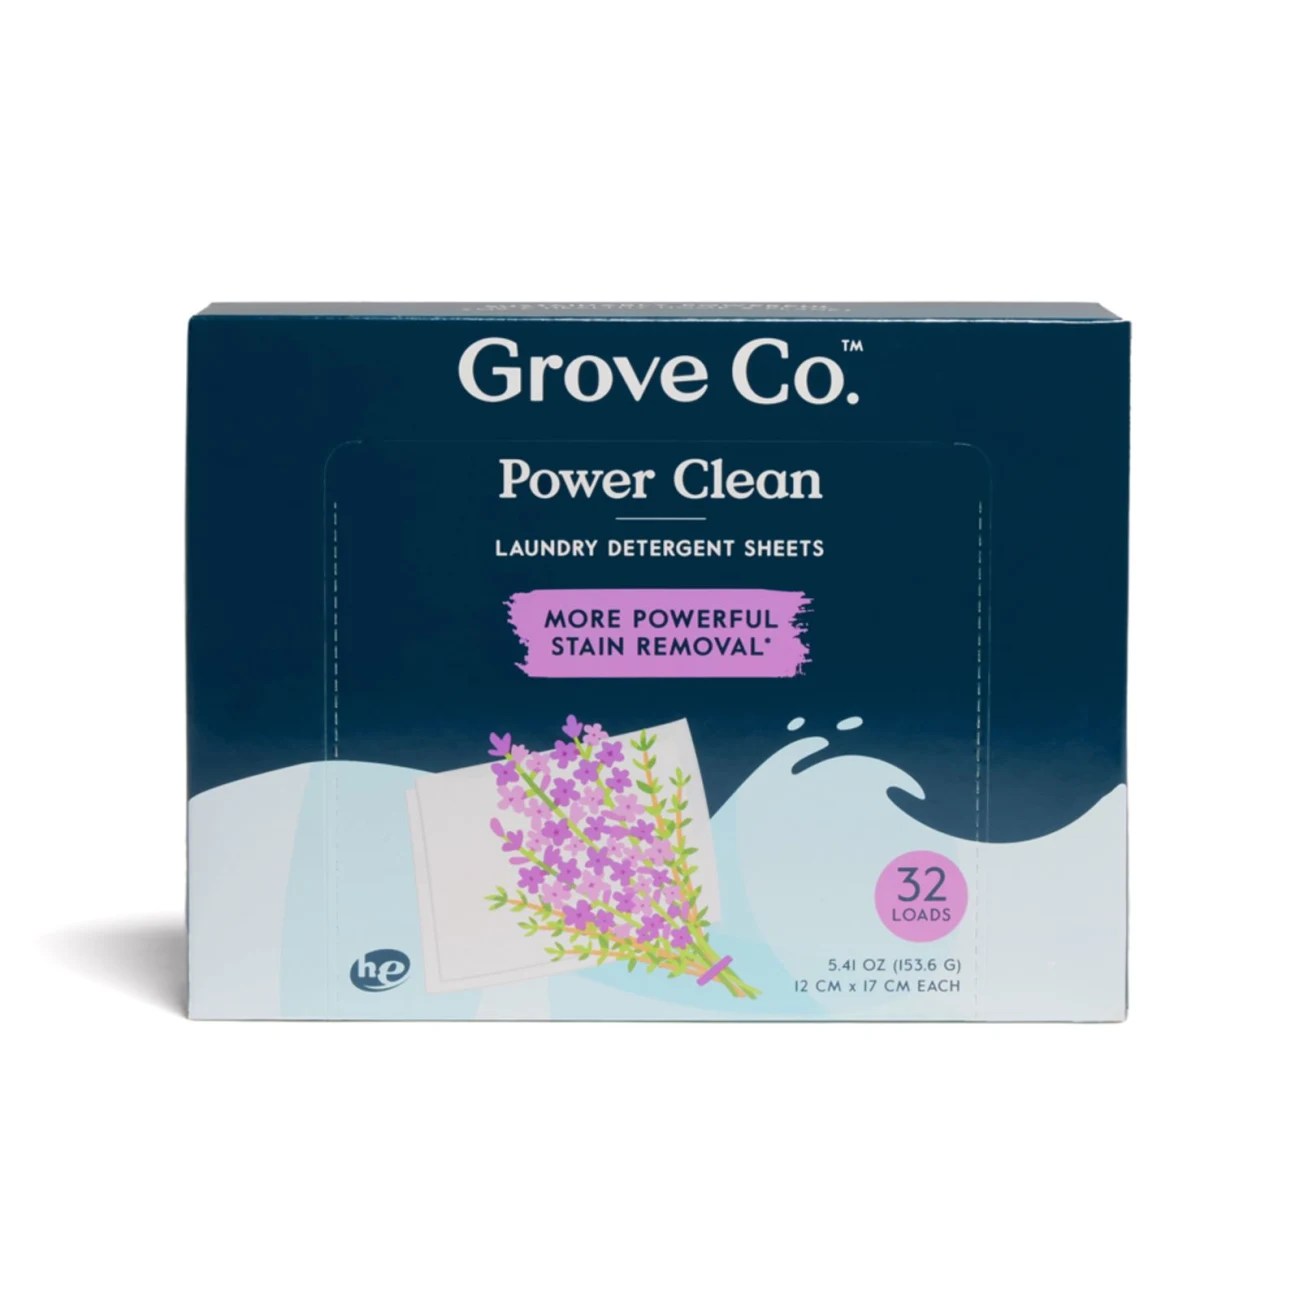 grove co laundry sheets, celebrity cleaning brands